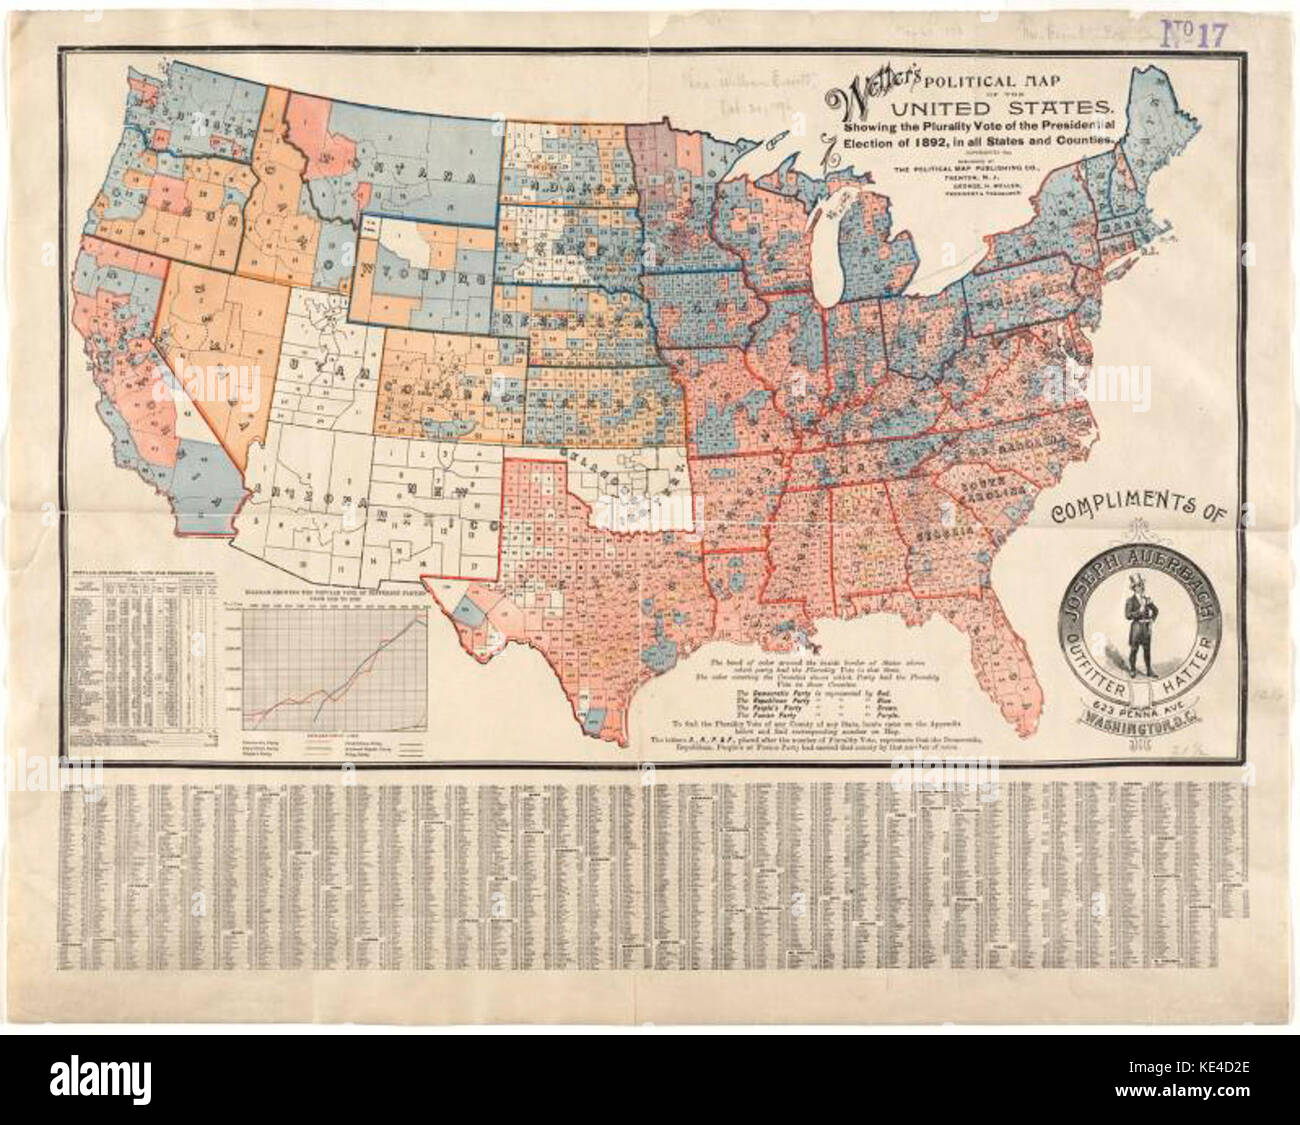 Weller's political map of the United States   showing the plurality vote of the presidential election of 1892, in all states and counties (10294212364) Stock Photo